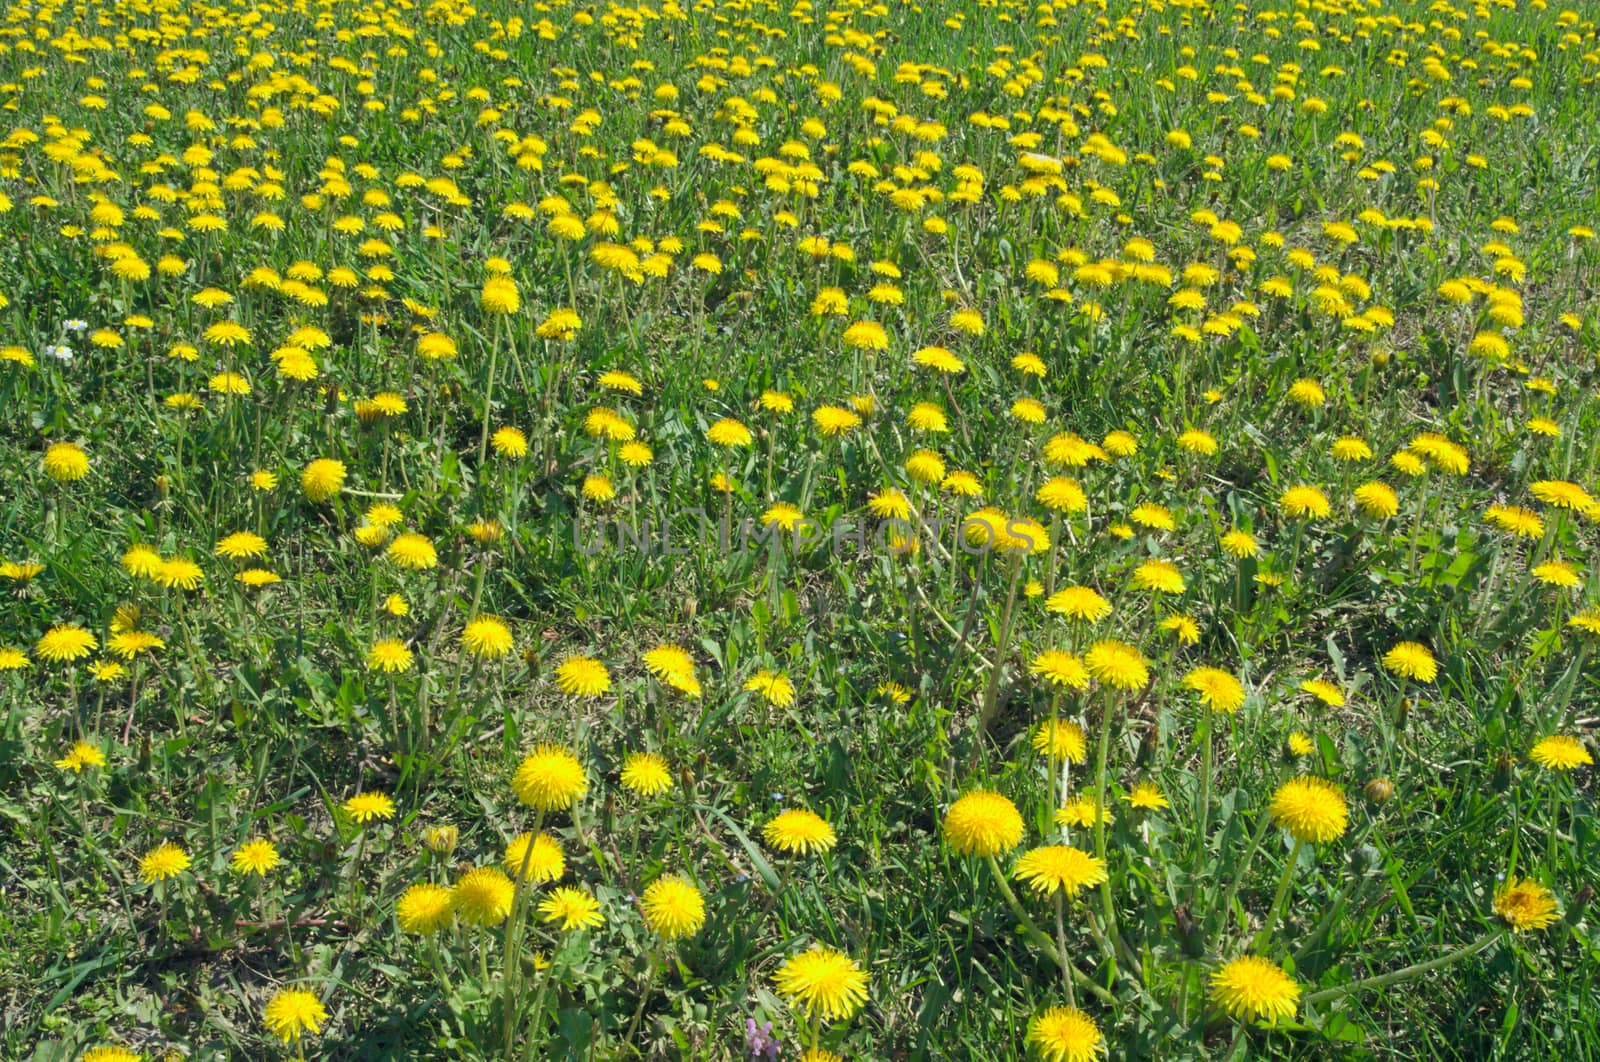 Dandelions blossoming with yellow flowers, at meadow, during spring by sheriffkule